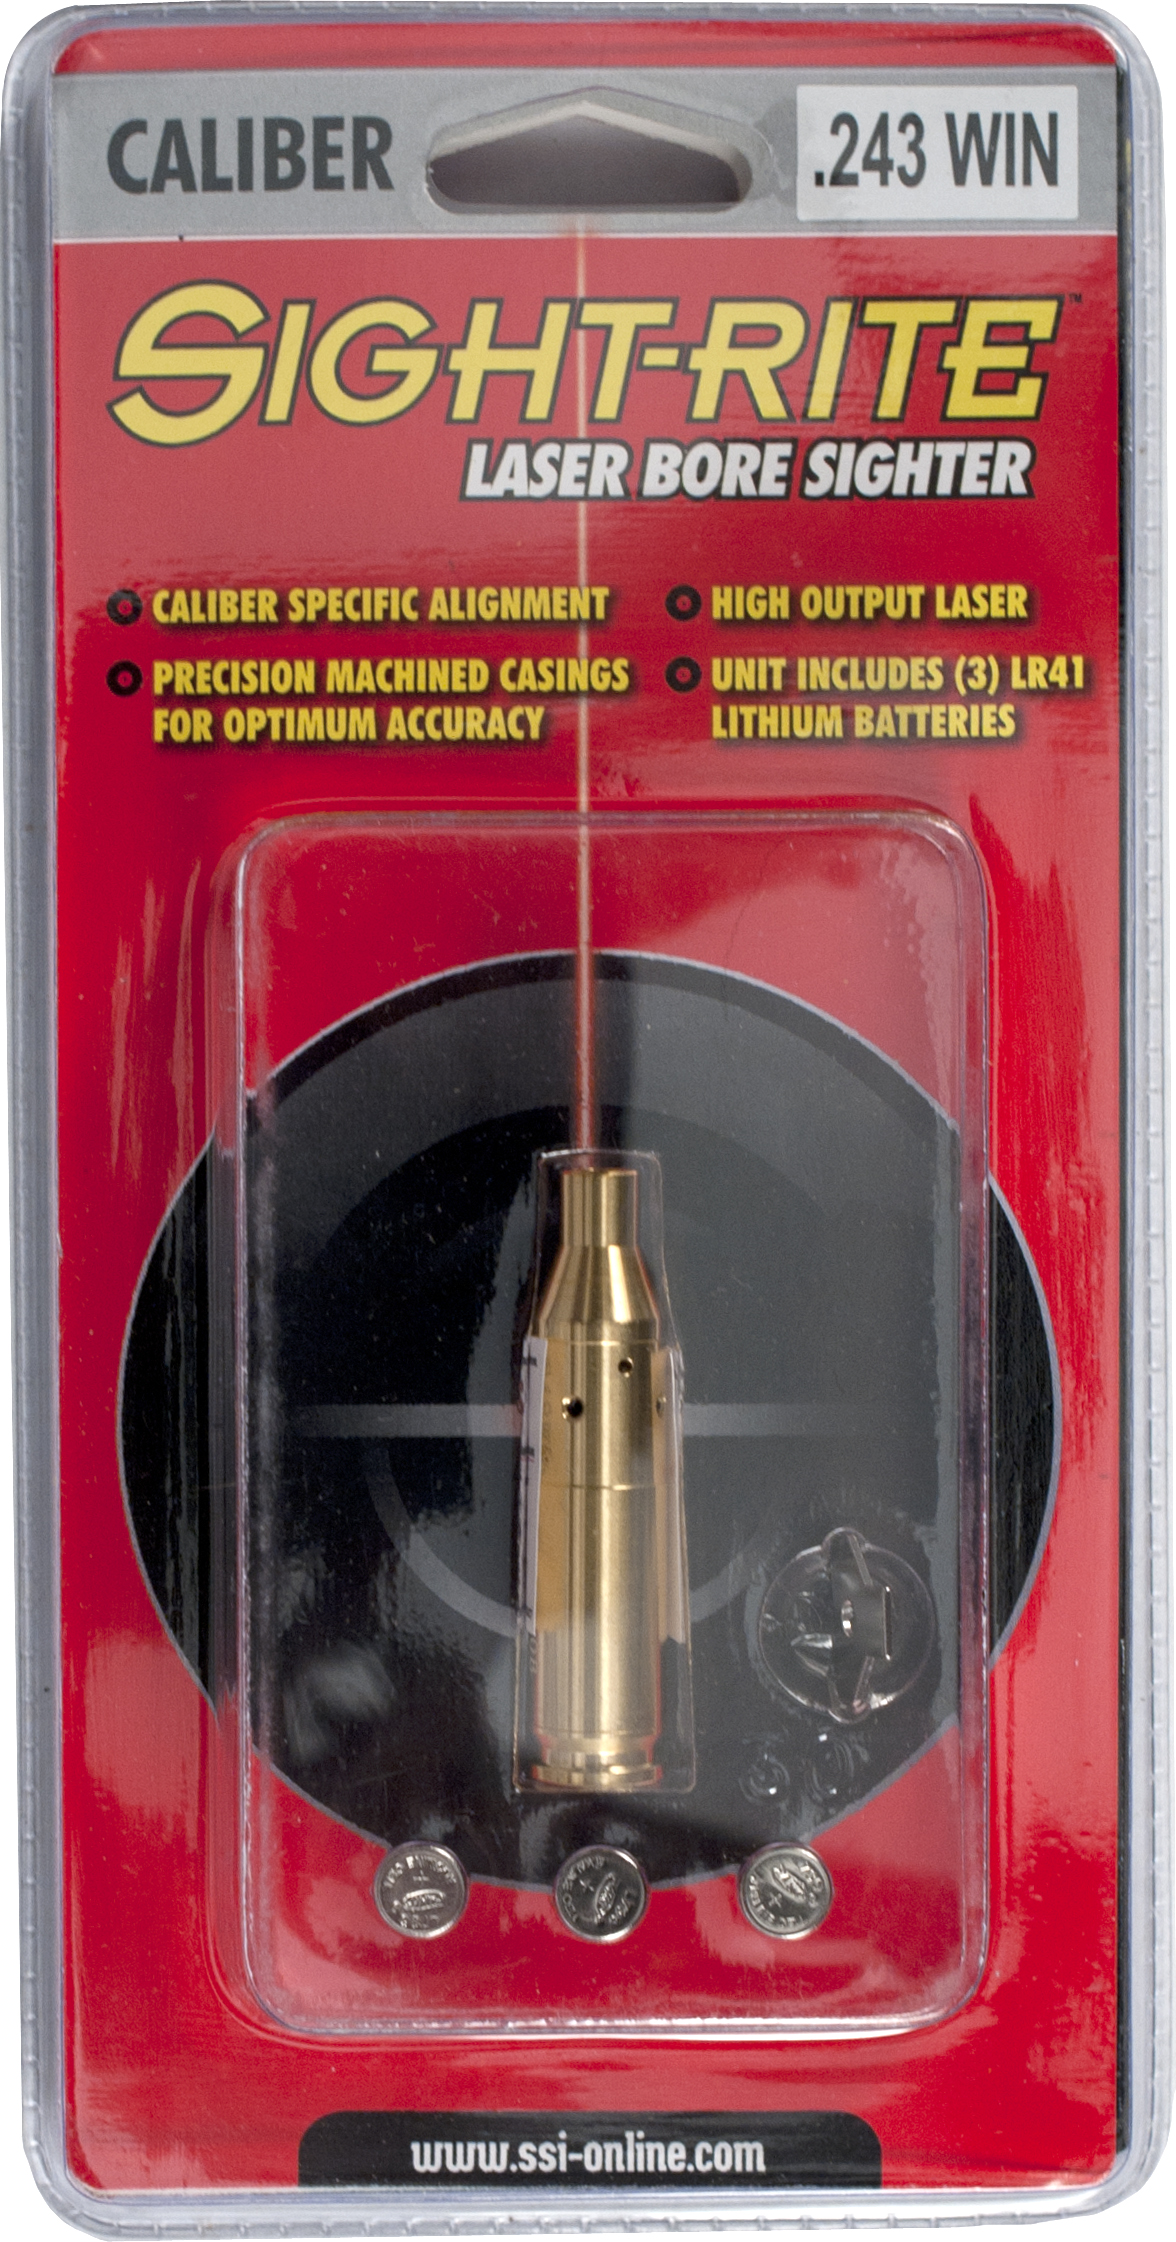 9mm SSI Sight-Rite Chamber Cartridge Laser Bore Sighter 